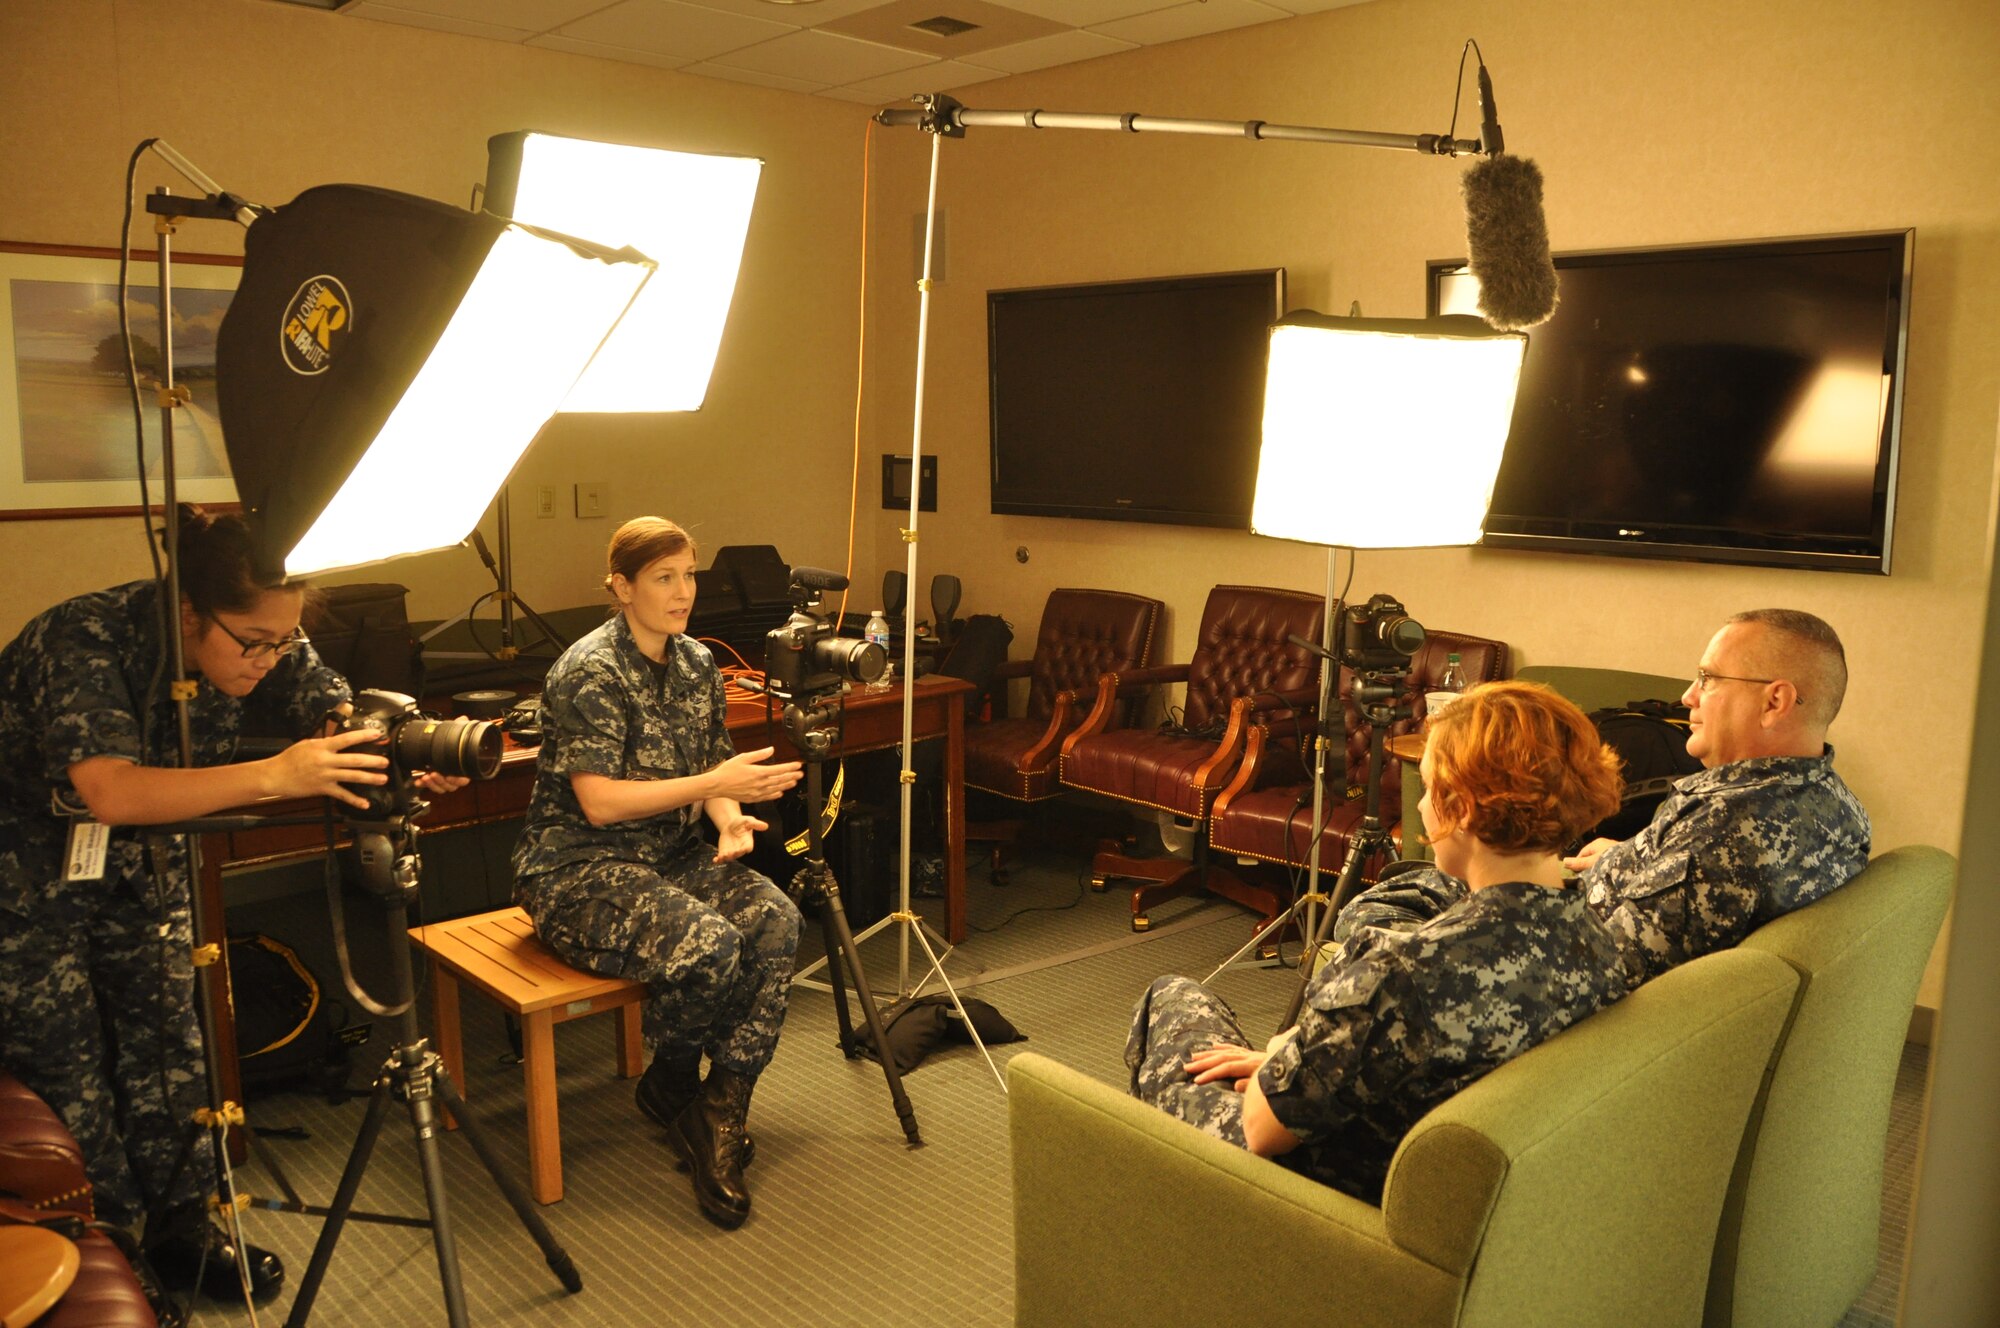 Mass Communication Specialist Seaman Jennifer Lebron and Mass Communication Specialist 1st Class Jen Blake interview Hospital Corpsman 1st Class Jennifer Heiselman and Hospital Corpsman 1st Class Whit Sloane Aug. 14, 2013 at the Charles C. Carson Center for Mortuary Affairs, Dover Air Force Base, Del. Lebron and Blake, assigned to Defense Media Activity, Fort Meade, Md., were highlighting the work of the Navy liaisons who support the mortuary mission and care for fallen sailors and their families. The liaisons are two of only 12 licensed funeral directors in the Navy. (U.S. Air Force photo/Christin Michaud)